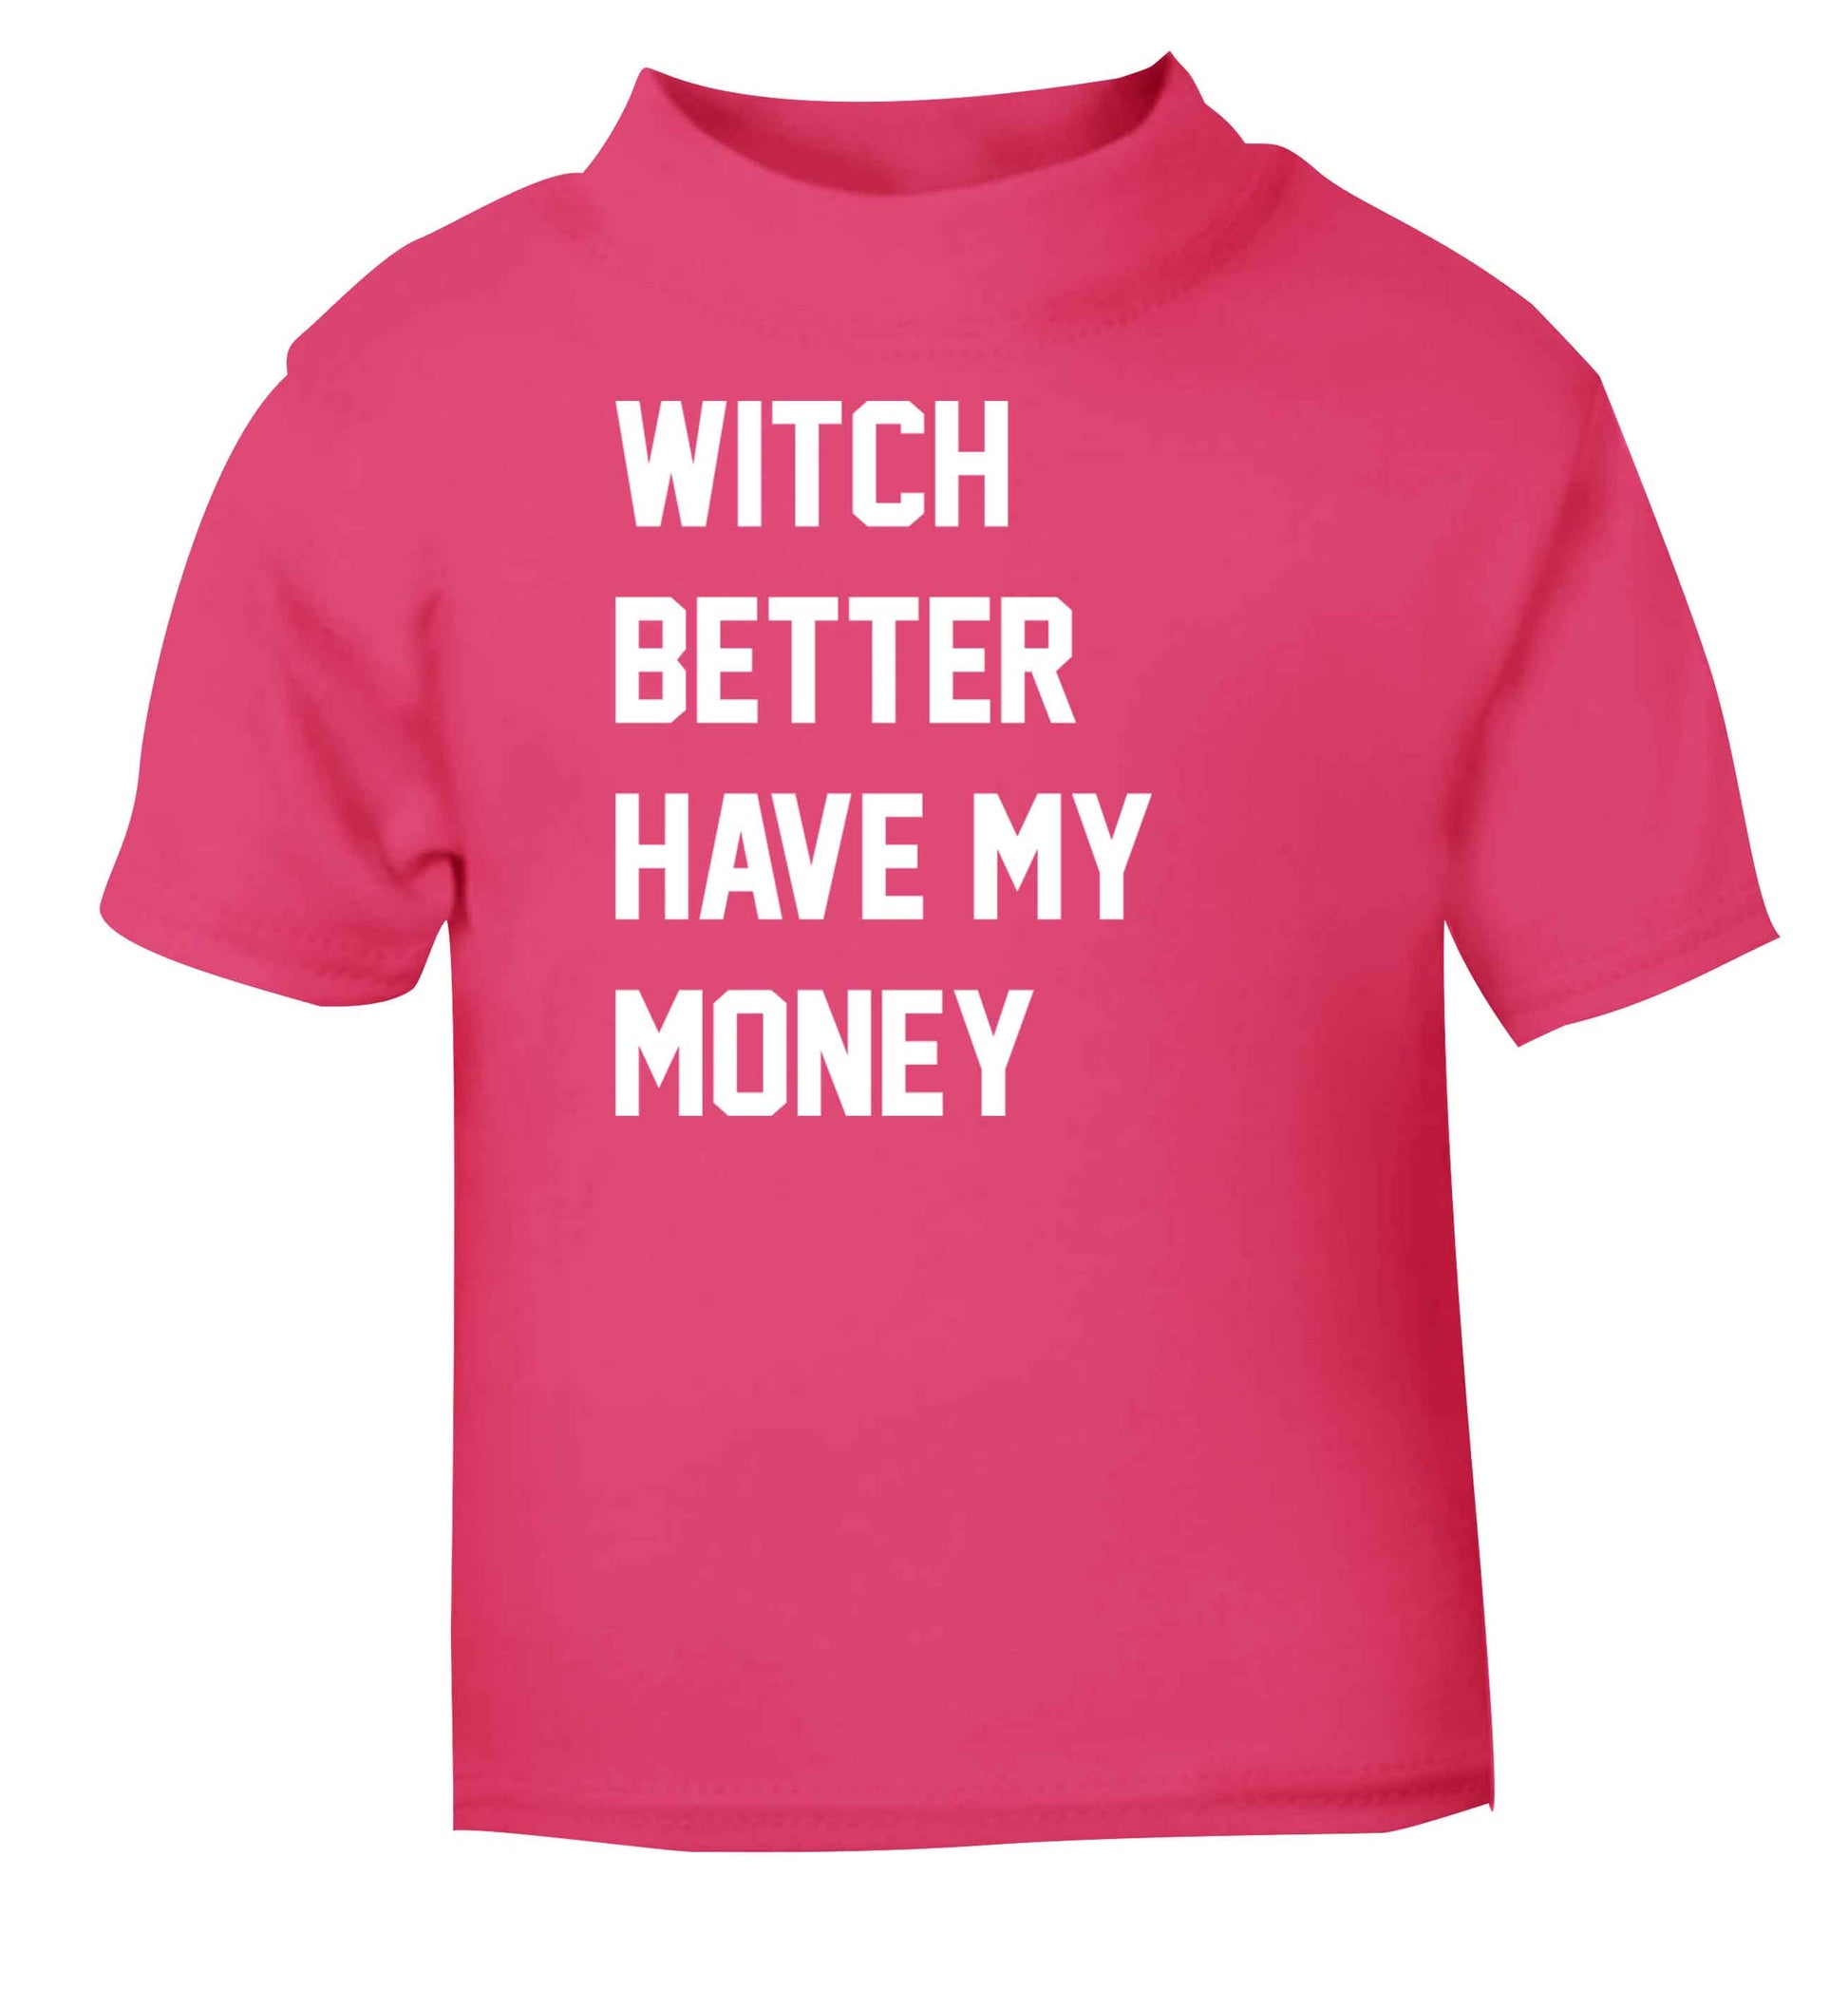 Witch better have my money pink baby toddler Tshirt 2 Years